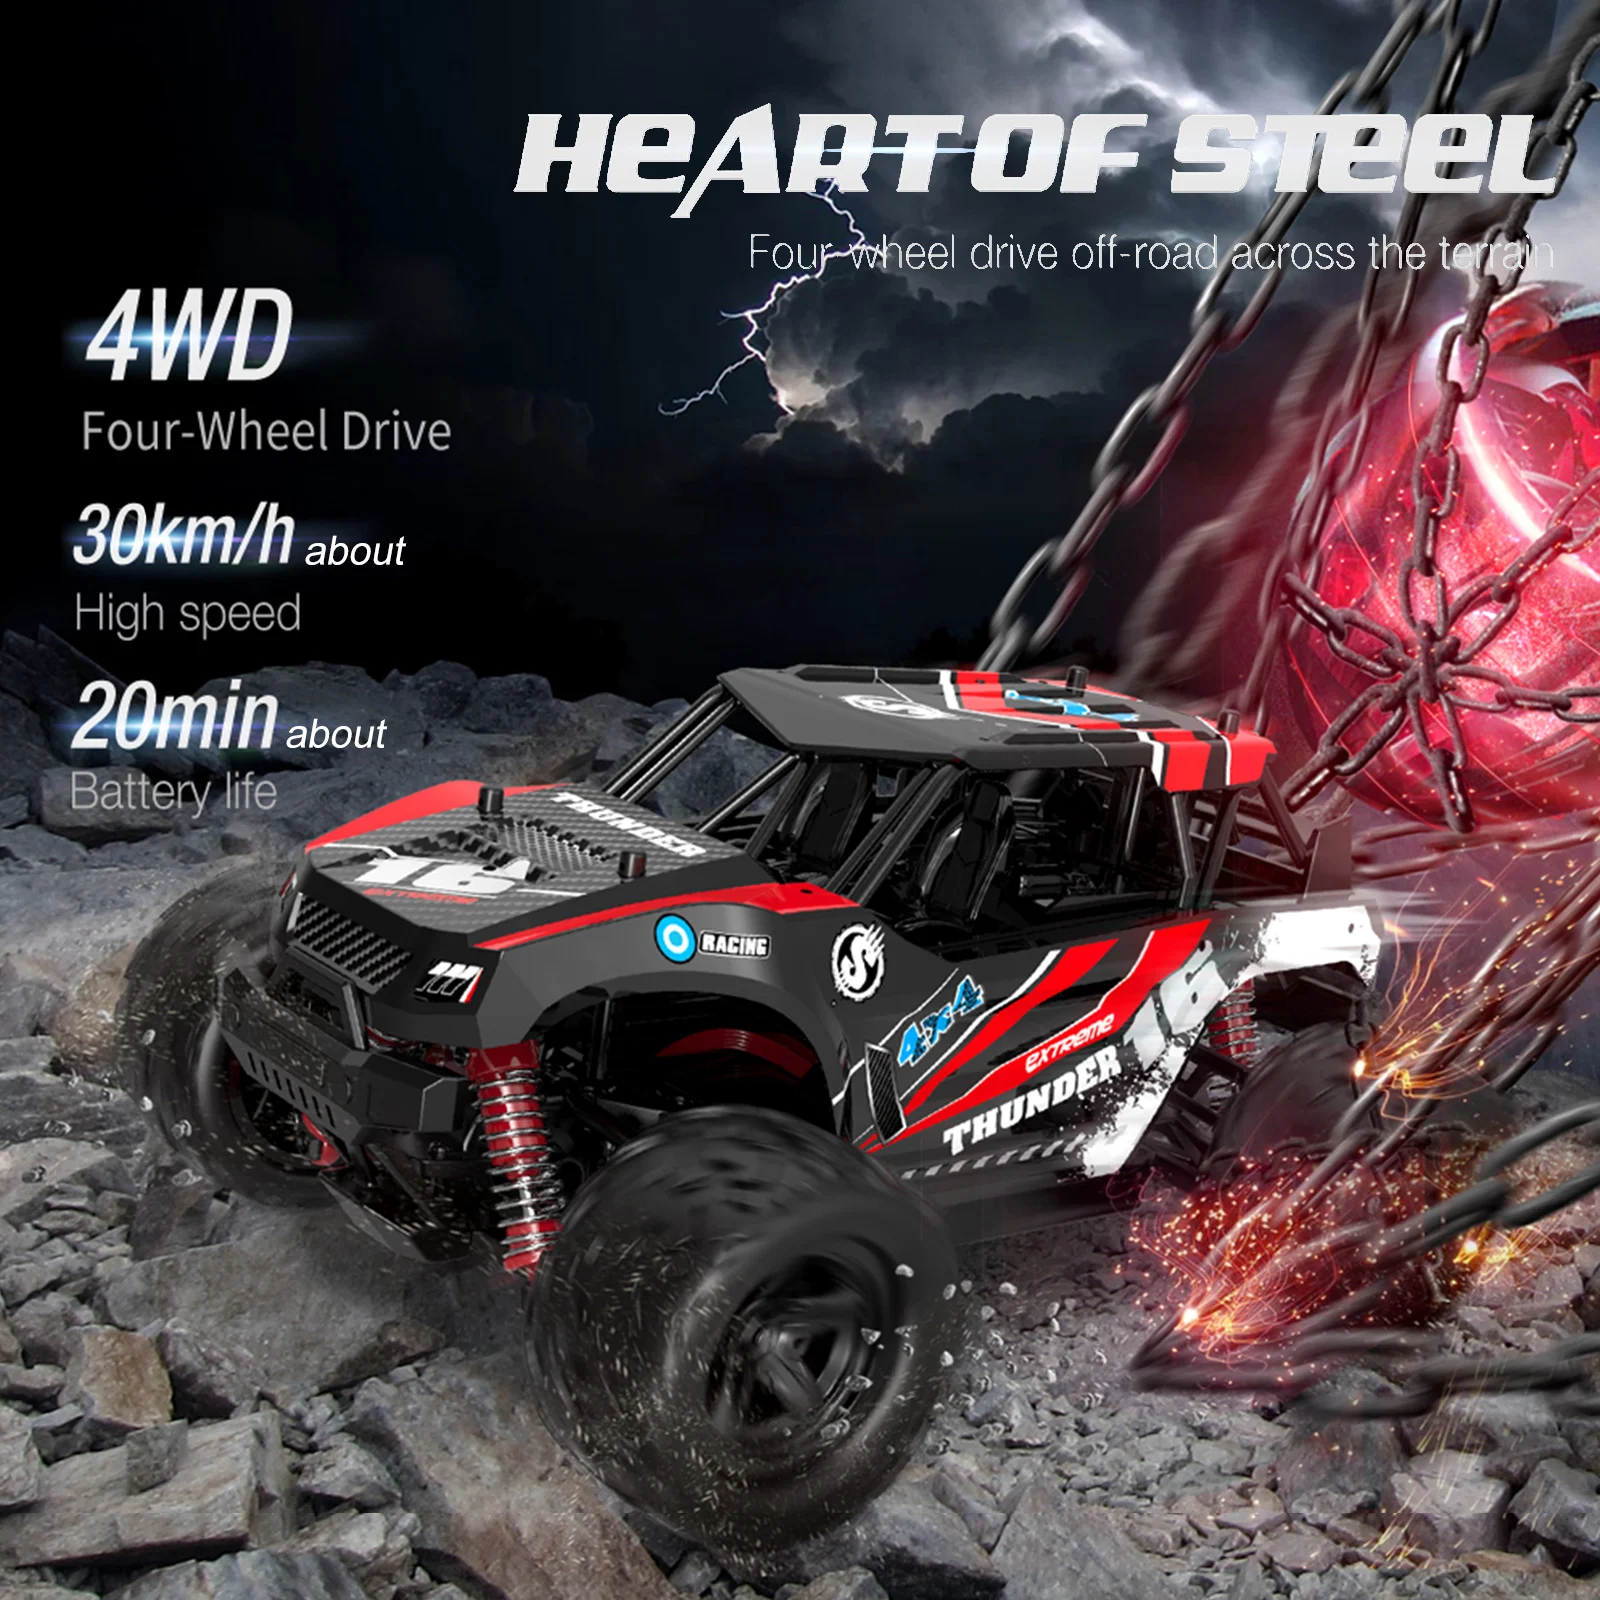 

1:18 RC Cars Monster Trucks High Speed 30km/h Off-road 4WD RC Monster Trucks Offroad Hobby RC Truck Toys for Adults Kids